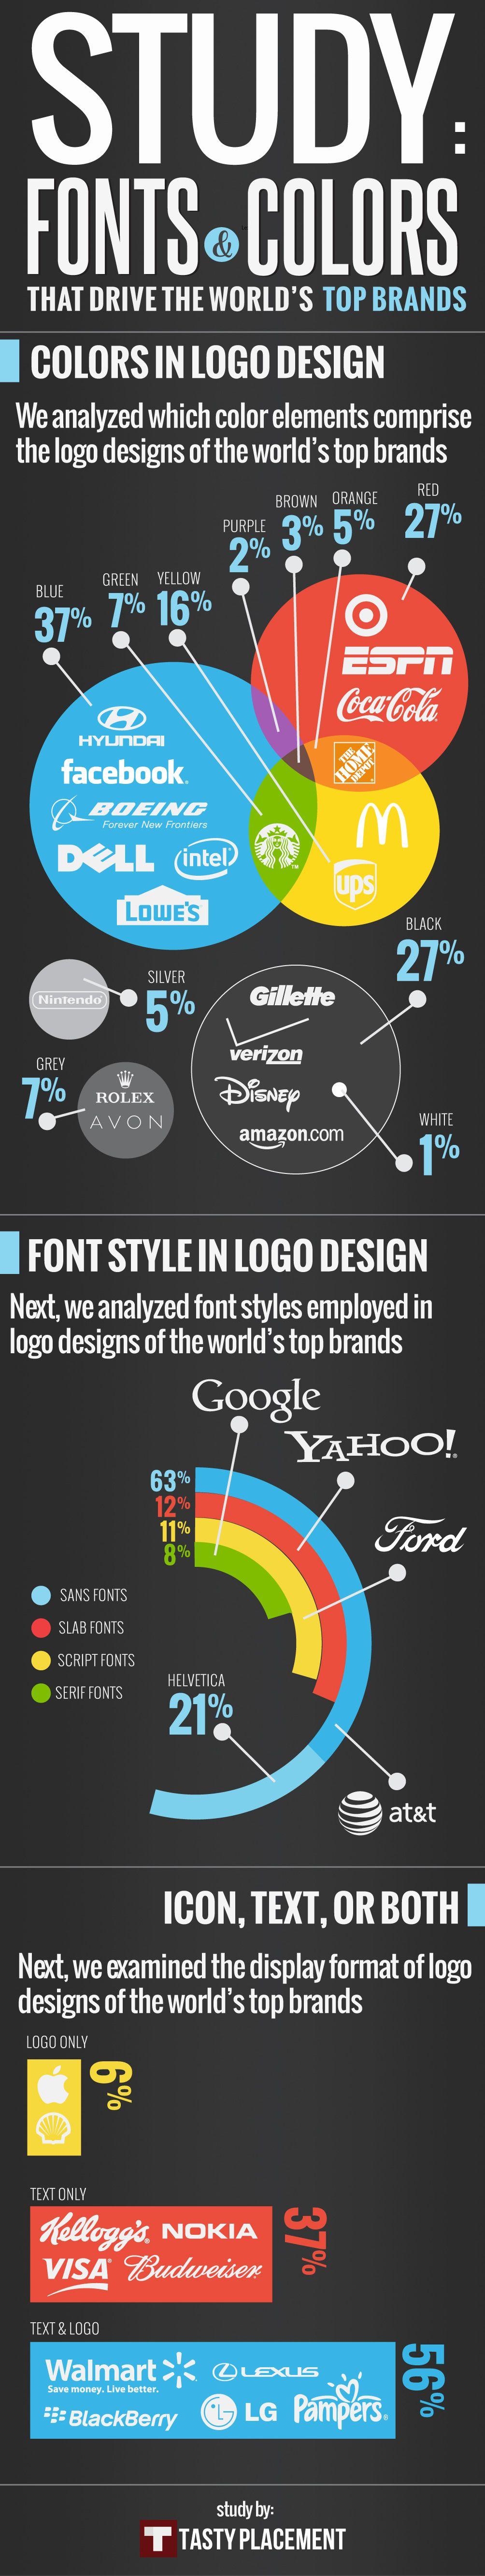 Top Colors for Logo - Fonts & Colors That Drive the World's Top Brands | Visual.ly